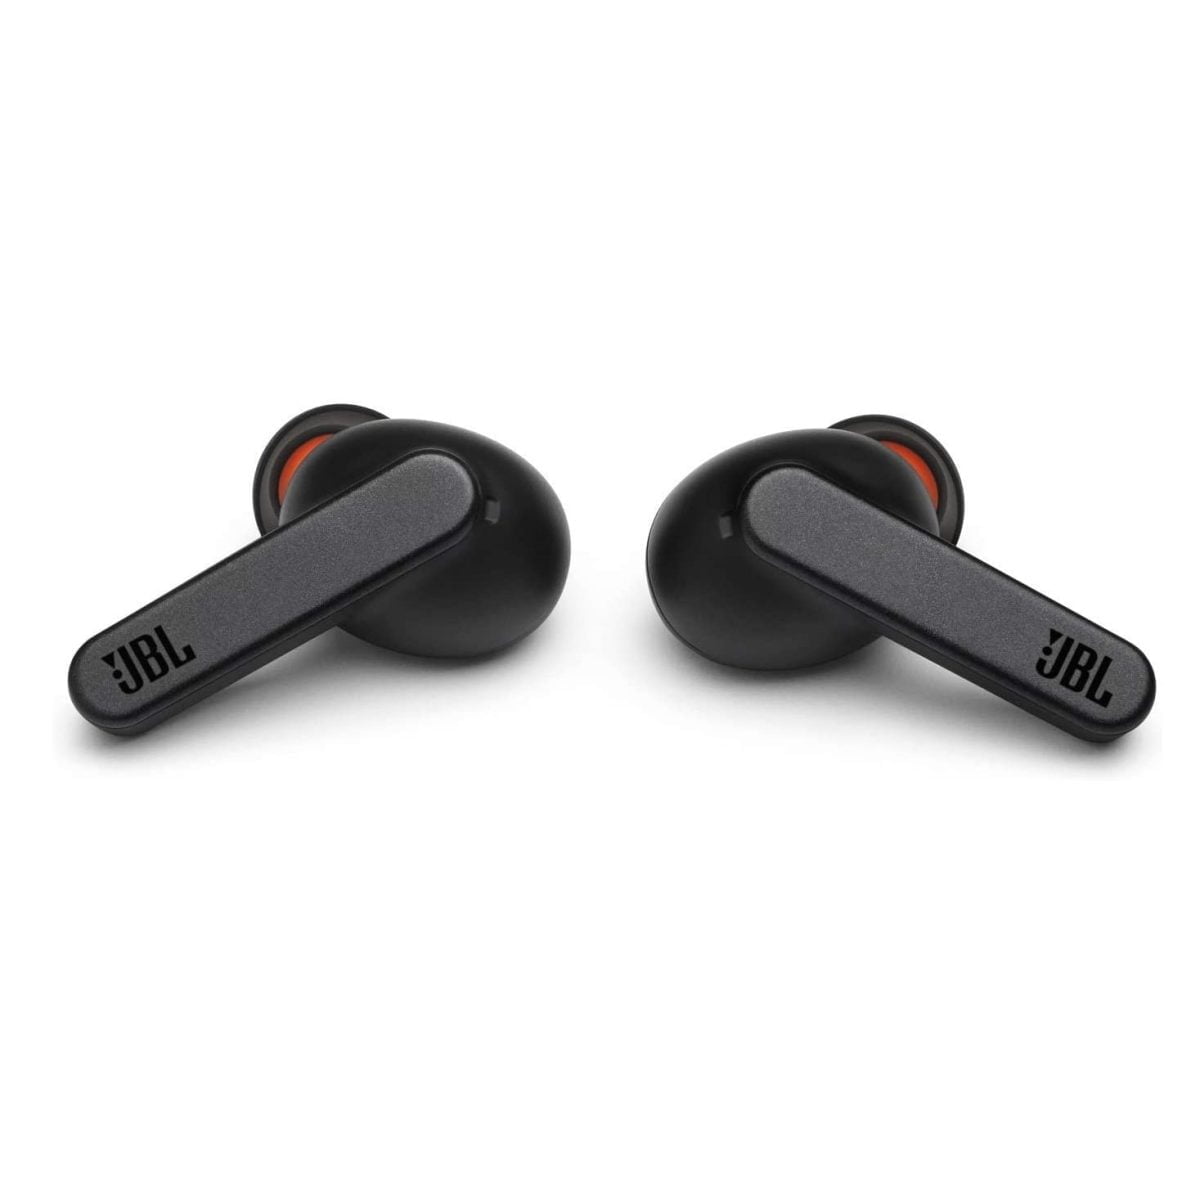 611Mq5Buznl. Ac Sl1500 Jbl &Lt;H1&Gt;Jbl Live Pro Plus True Wireless Noise Cancelling Earbuds-Black&Lt;/H1&Gt; Https://Www.youtube.com/Watch?V=Oan6Moxjv58 &Nbsp; The Best Audio Solution Not Matter The Device, Jbl Live Pro+ Tws Delivers An Immersive True Wireless Experience With Incredible Jbl Signature Sound. Let Smart Ambient Connect You To Your Environment, Or Focus On The Music With Adaptive Noise Cancelling. Then Switch Easily From Tunes To Group Calls With 4 Mics (2 Beamforming Mics Per Side) To Capture Your Voice With The Feeling Of Face-To-Face Conversation And A Third Mic For Environmental Noise Reduction. All Commands Are On The Earbuds, So You Can Manage Music And Calls With Your Finger Only. Jbl Earbuds Jbl Live Pro Plus Noise Cancelling Earbuds-Black